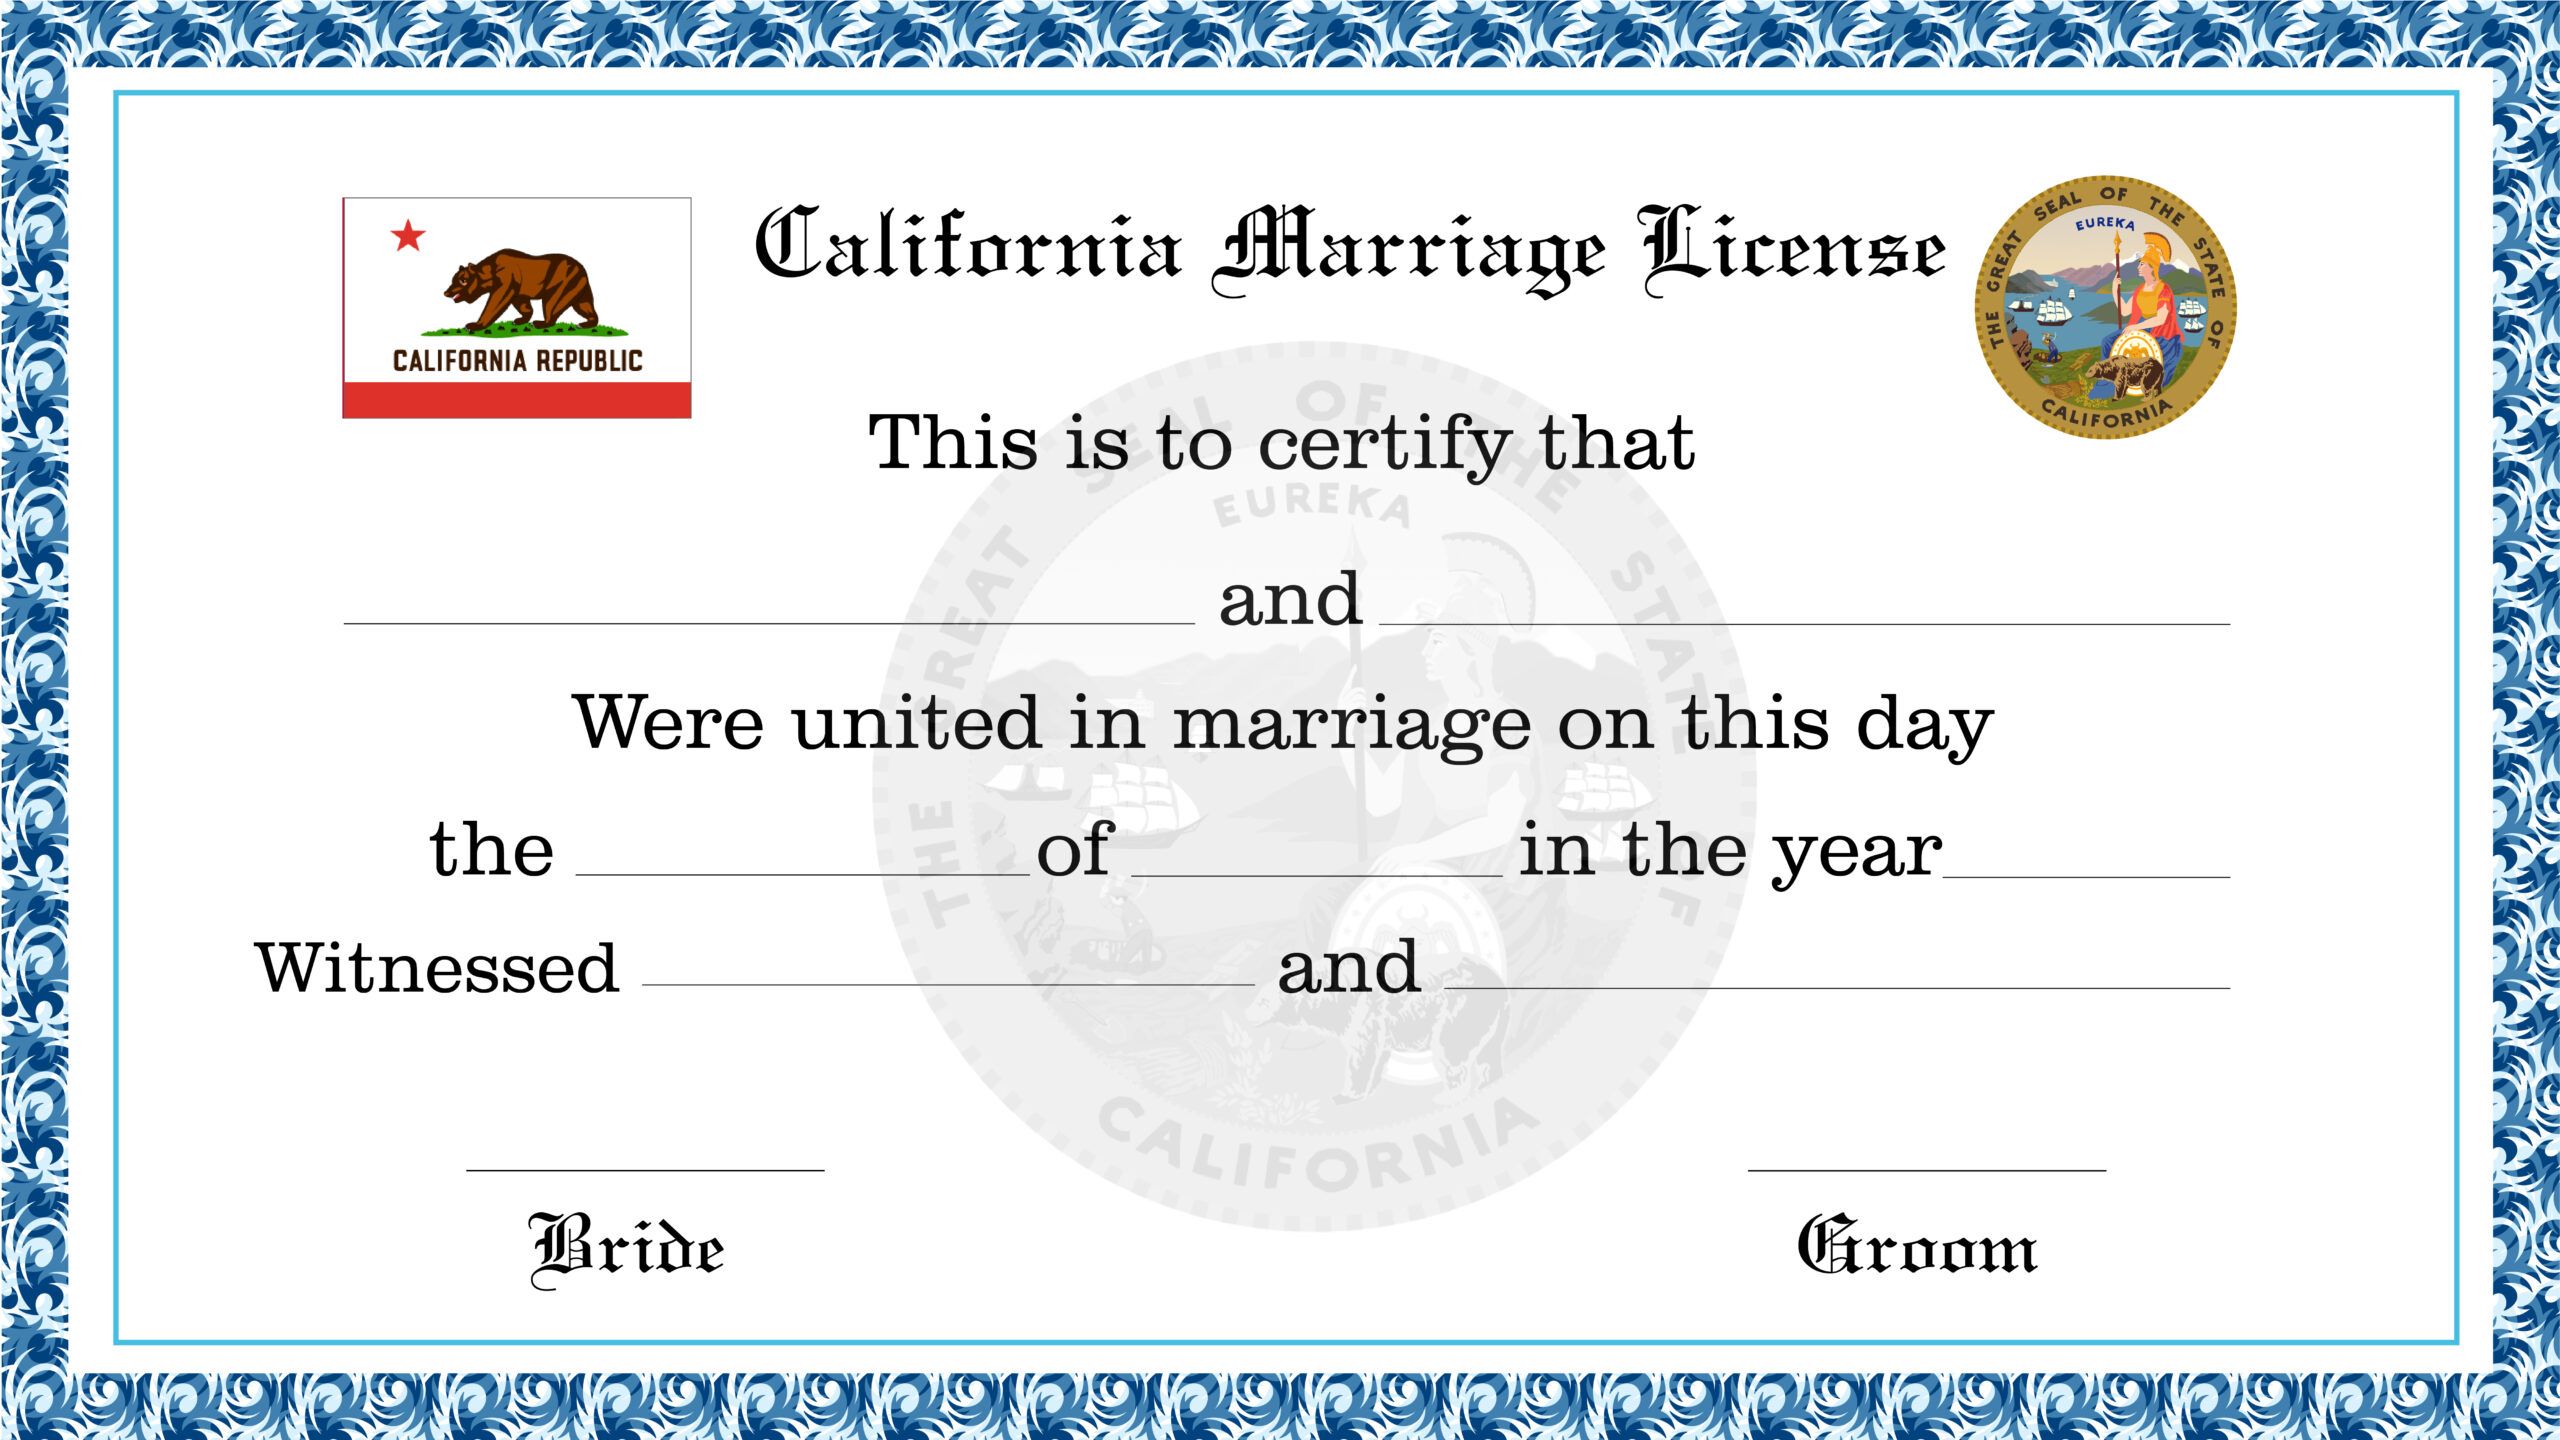 California Marriage License License Lookup